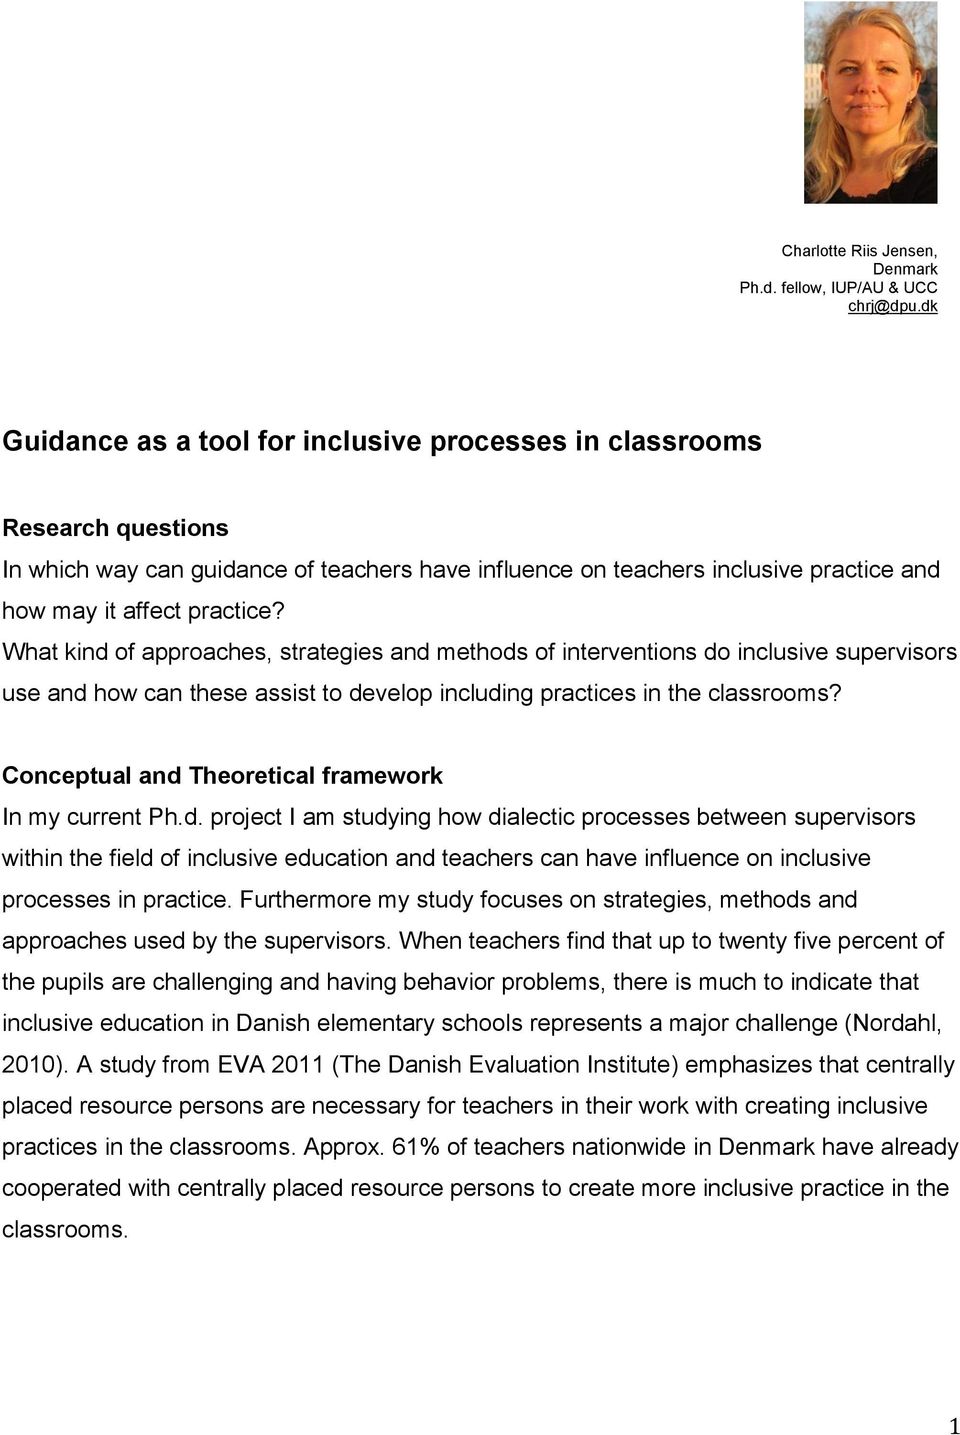 What kind of approaches, strategies and methods of interventions do inclusive supervisors use and how can these assist to develop including practices in the classrooms?